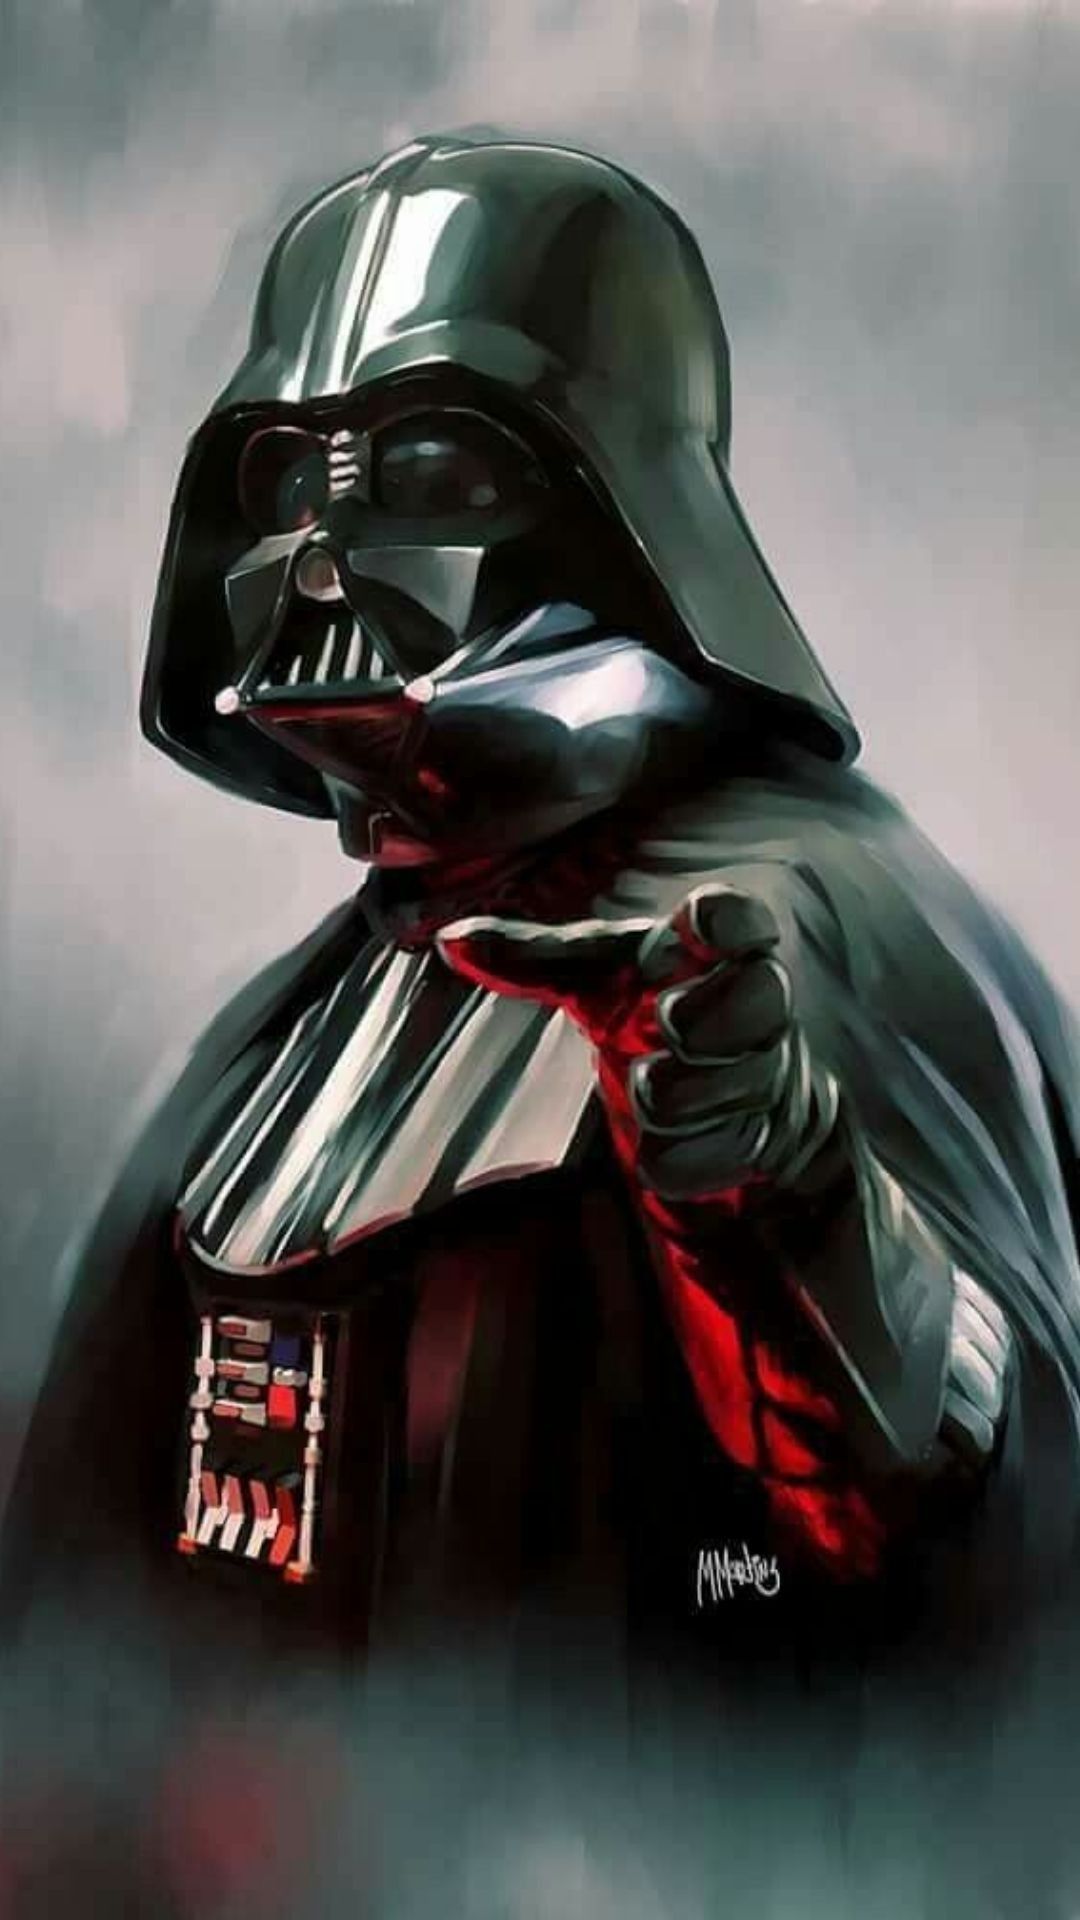 Have you force choked someone today?. Star wars image, Star wars picture, Star wars poster